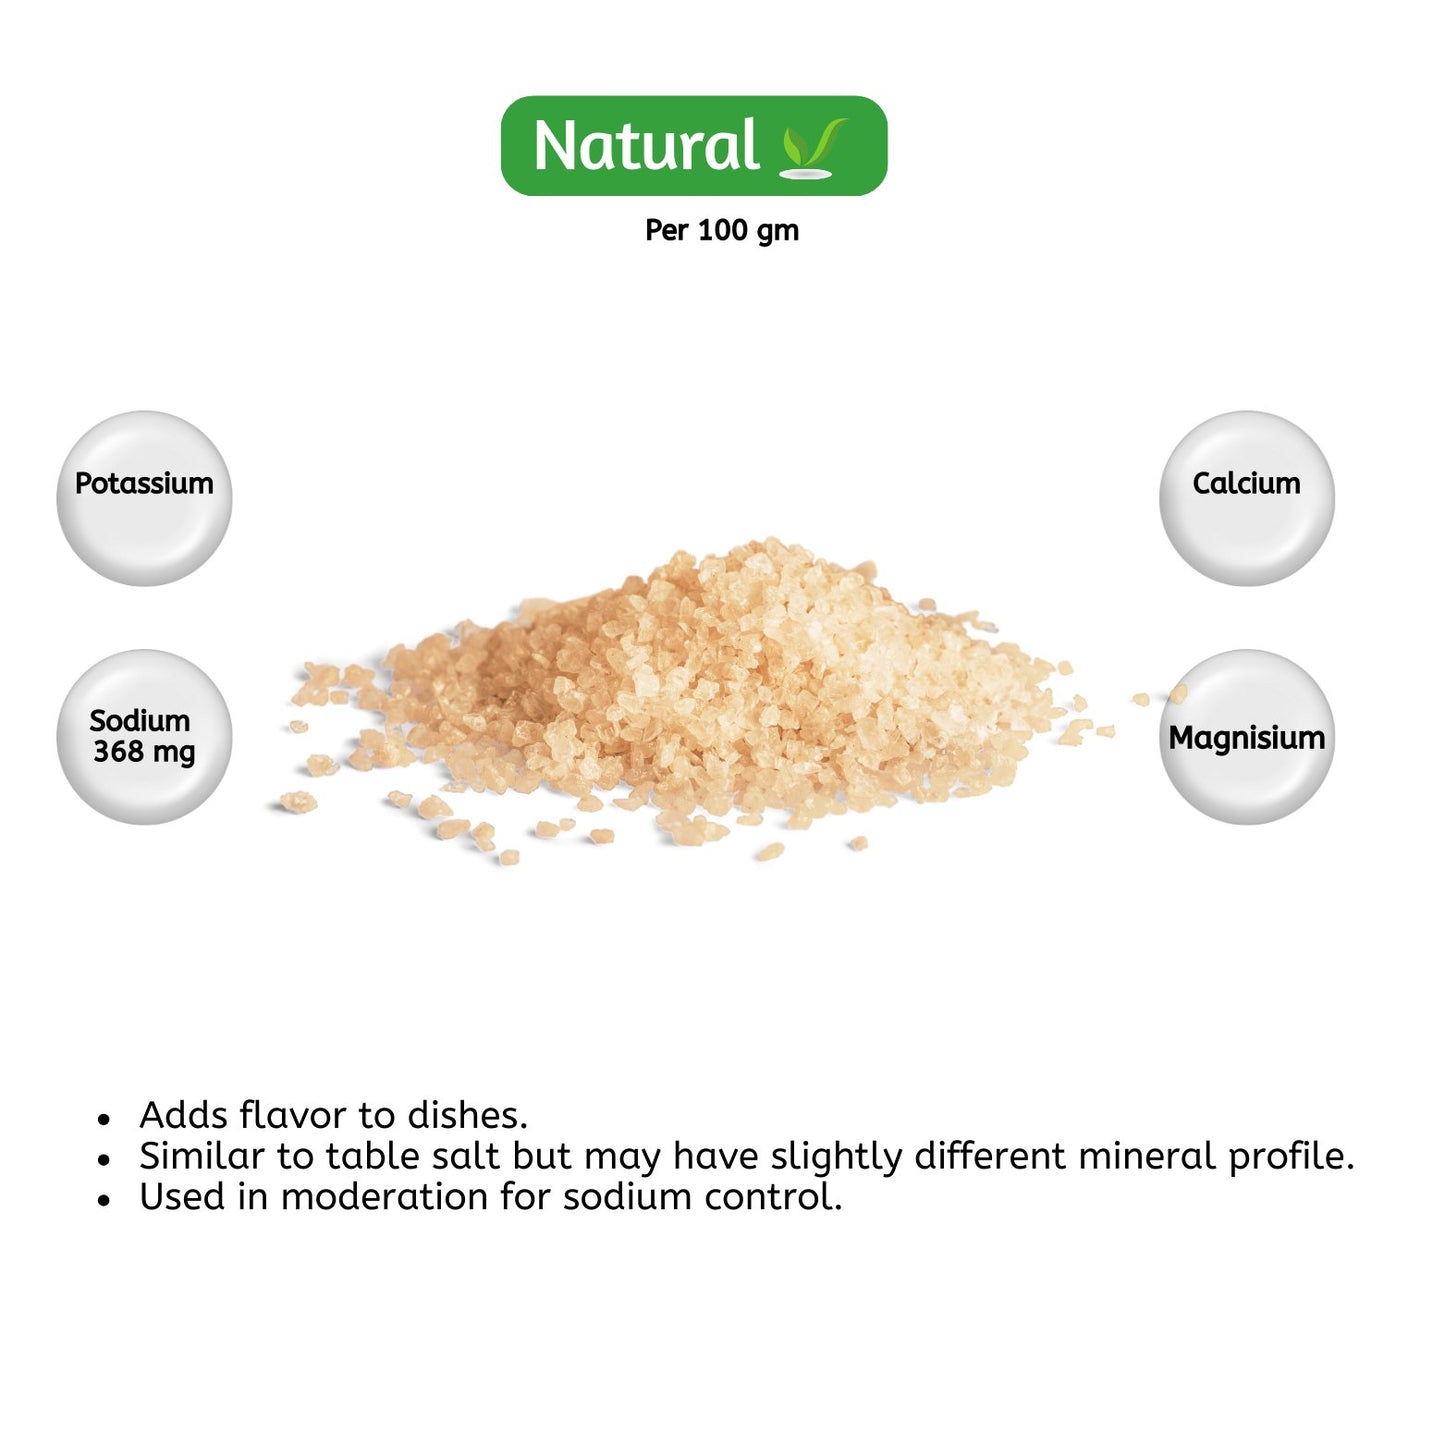 organic Organic Crystal Sea Salt - 500g - Online store for organic products in Bangalore - Groceries | Groceries 1